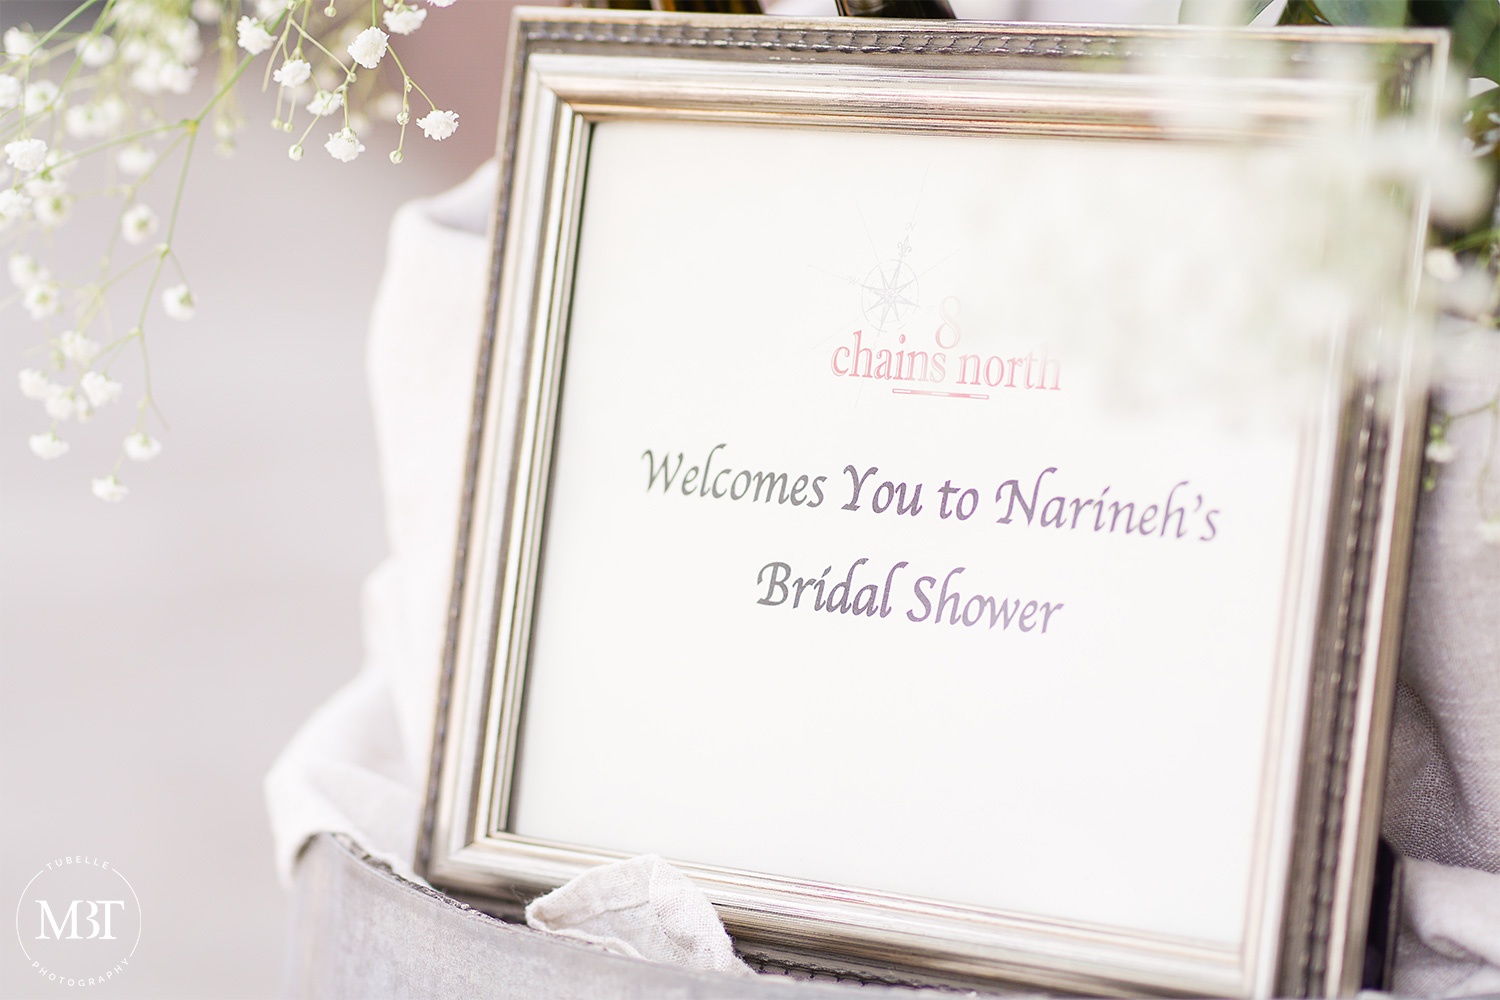 bridal shower decoration - 8 chains north welcome sign - taken in Waterford, Virginia at a bridal shower covered by an event photographer in Washington, DC